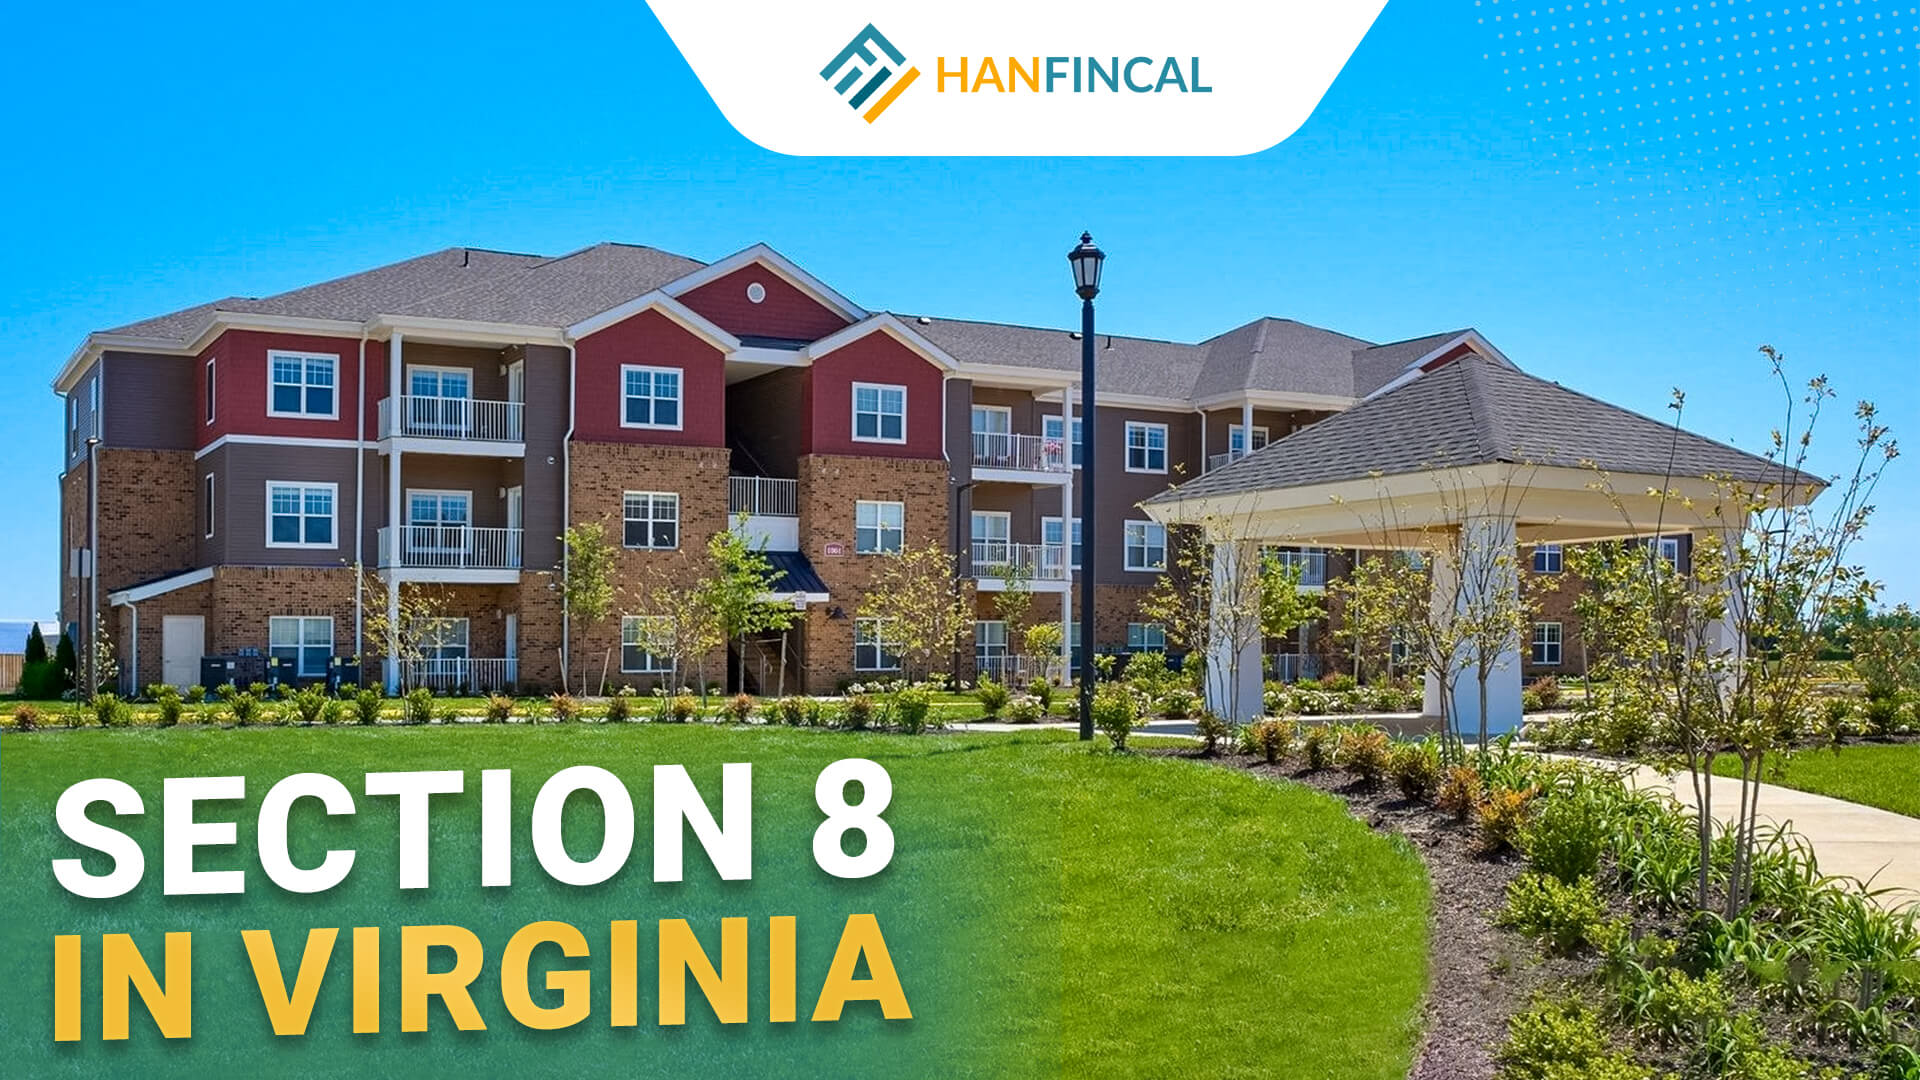 how-to-apply-for-section-8-in-virginia-hanfincal